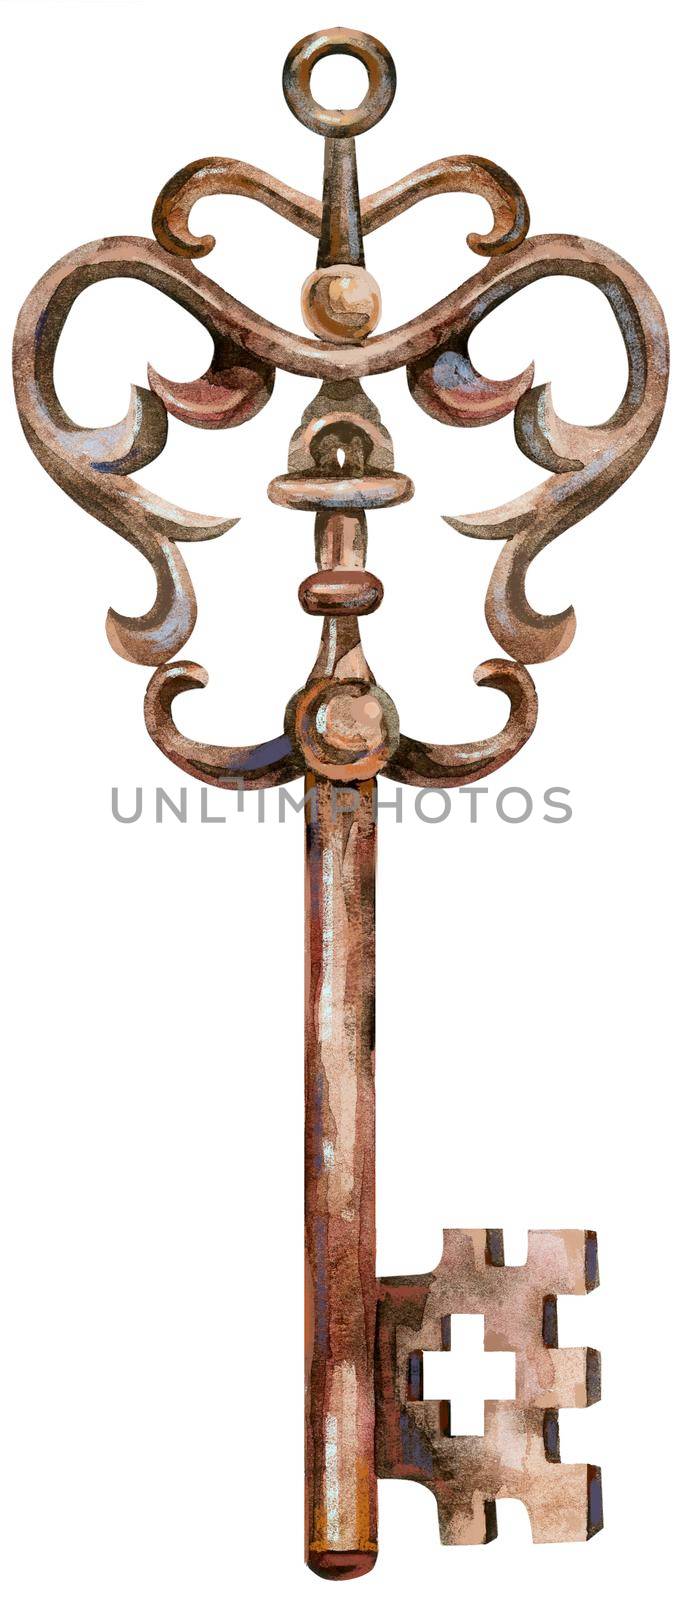 Bronze Key. Watercolor illustration on a white background